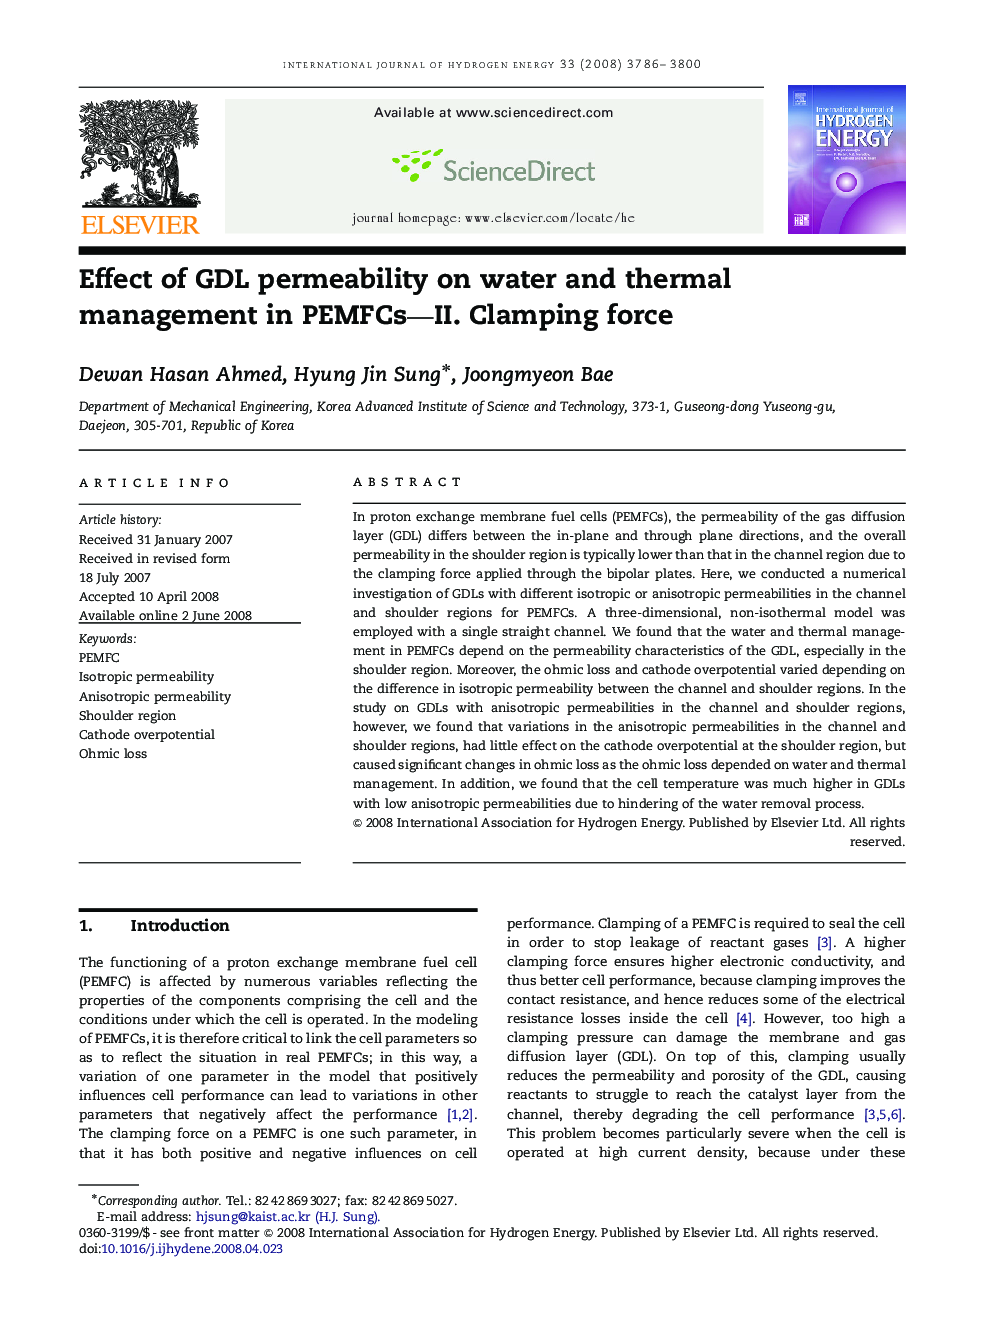 Effect of GDL permeability on water and thermal management in PEMFCs—II. Clamping force